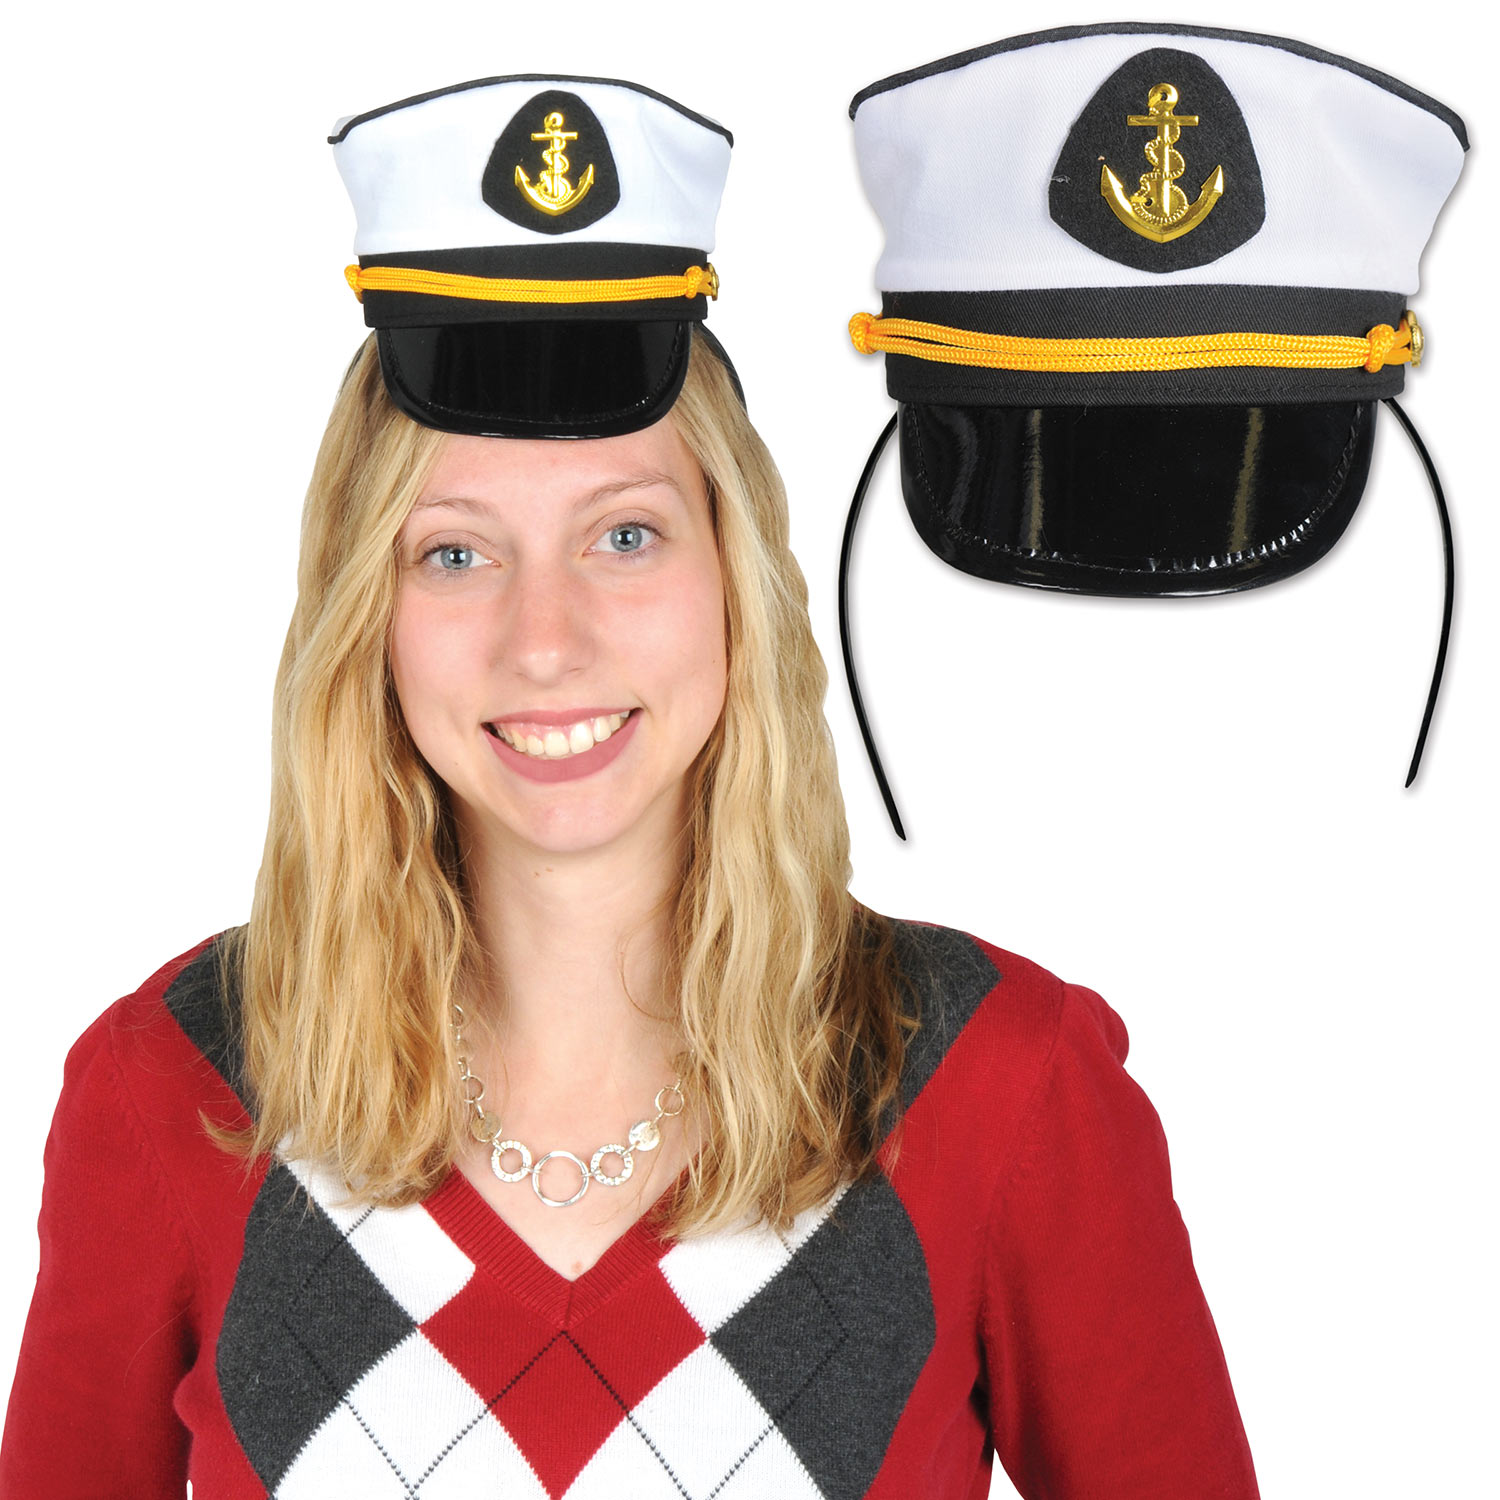 Headband with an attachment that replicates a yacht captains hat.